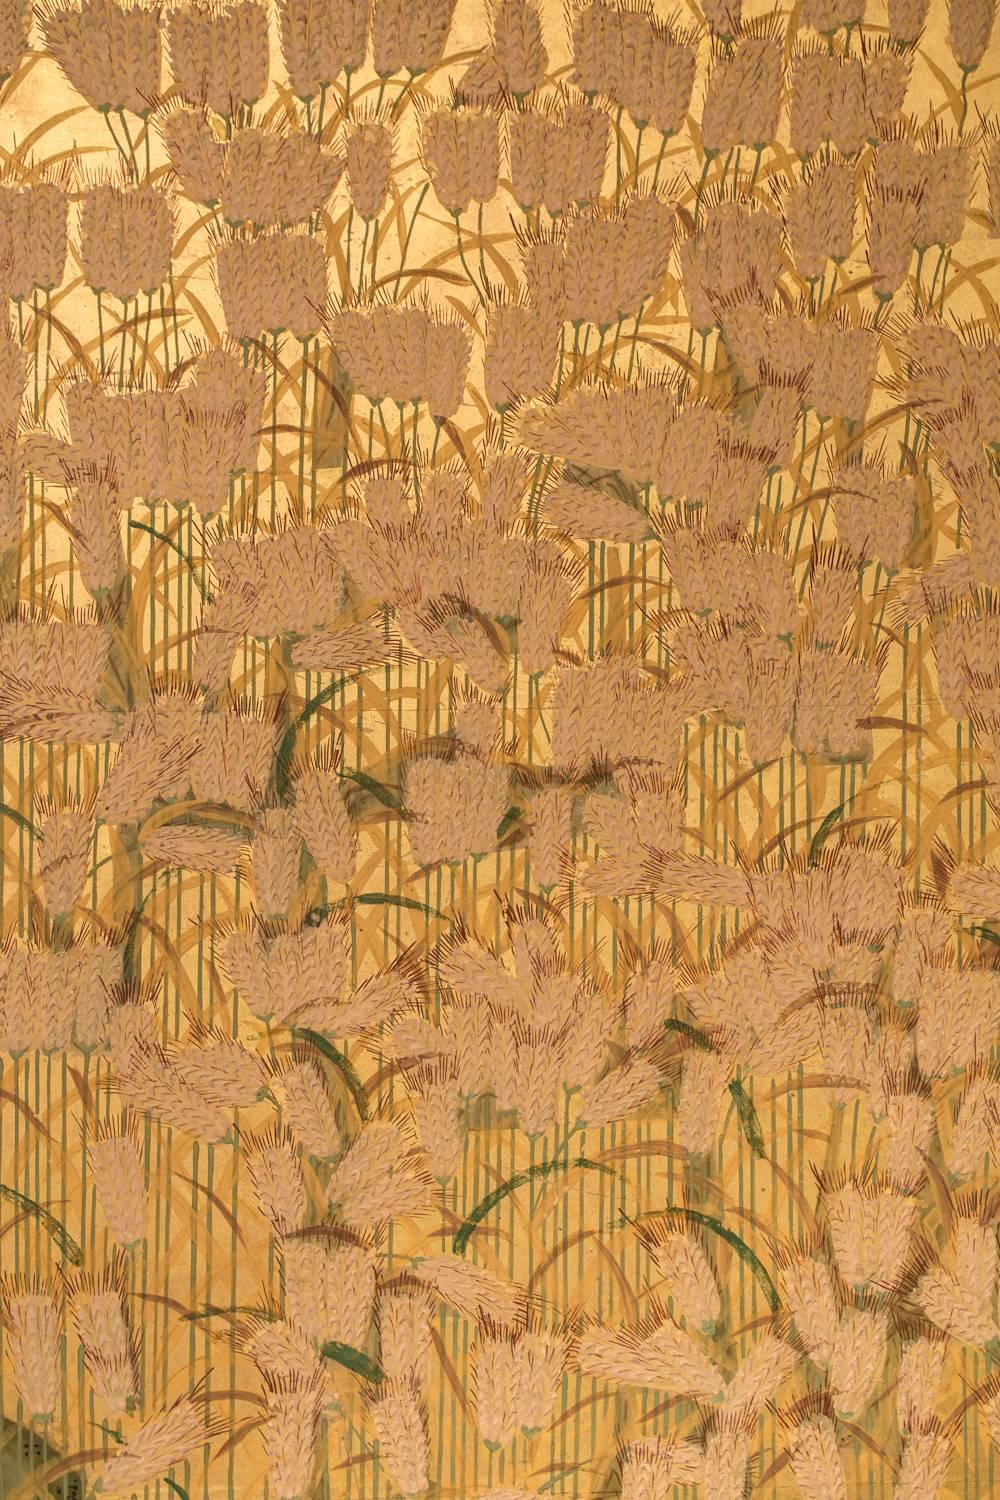 Japanese Six-Panel Screen: Field of Wheat by River's Edge 2